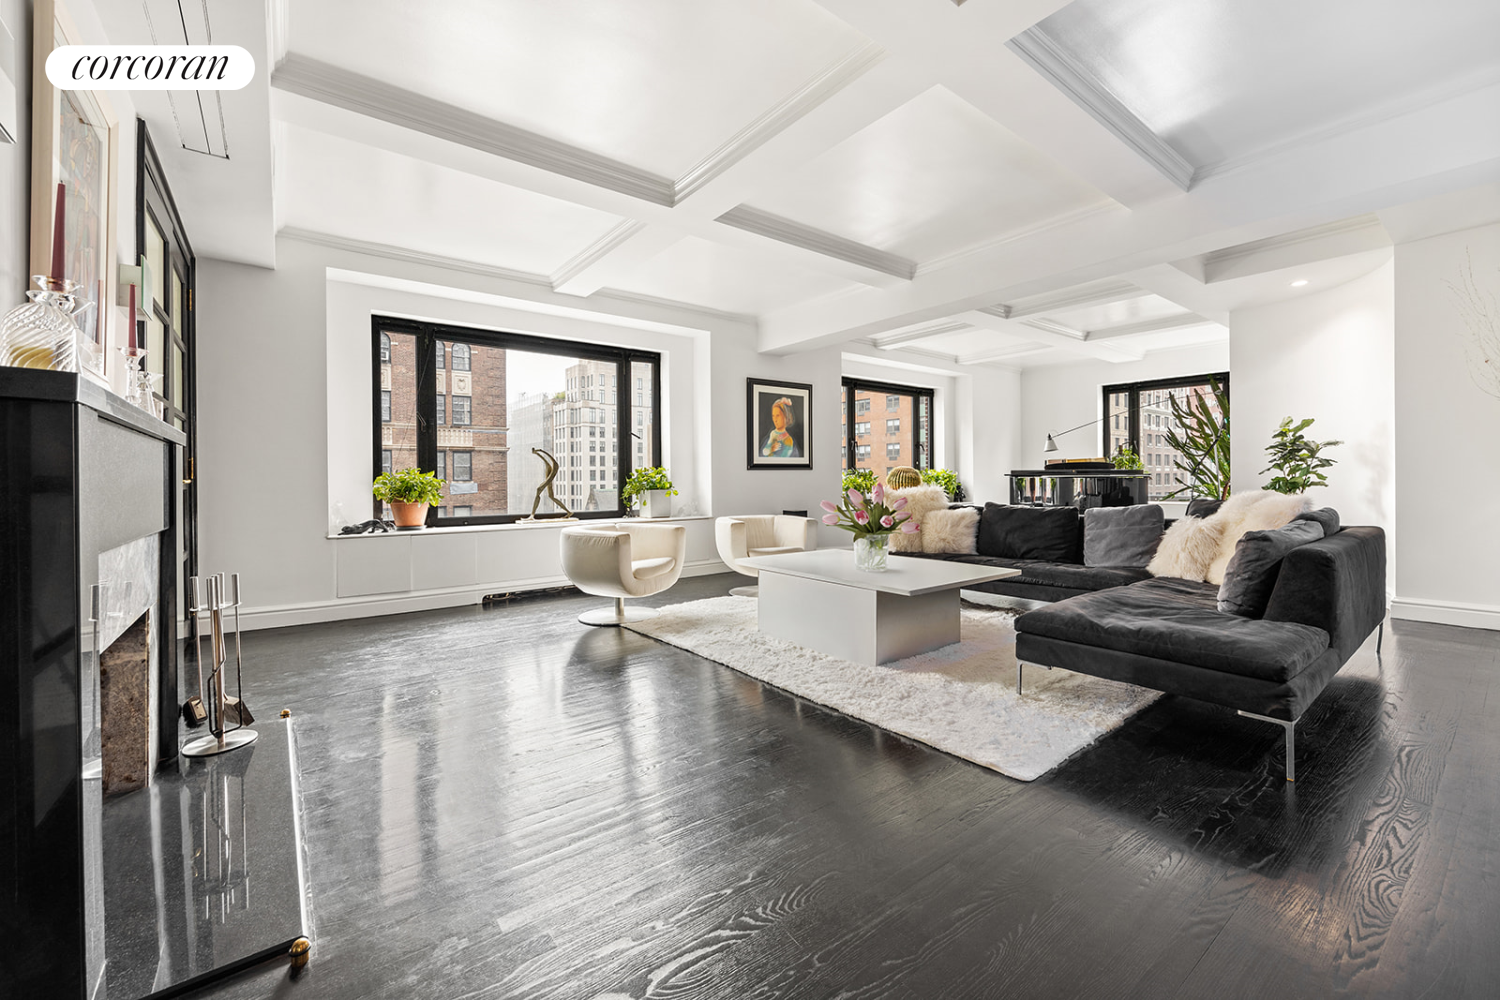 1045 Park Avenue 10Ab, Carnegie Hill, Upper East Side, NYC - 6 Bedrooms  
6 Bathrooms  
11 Rooms - 